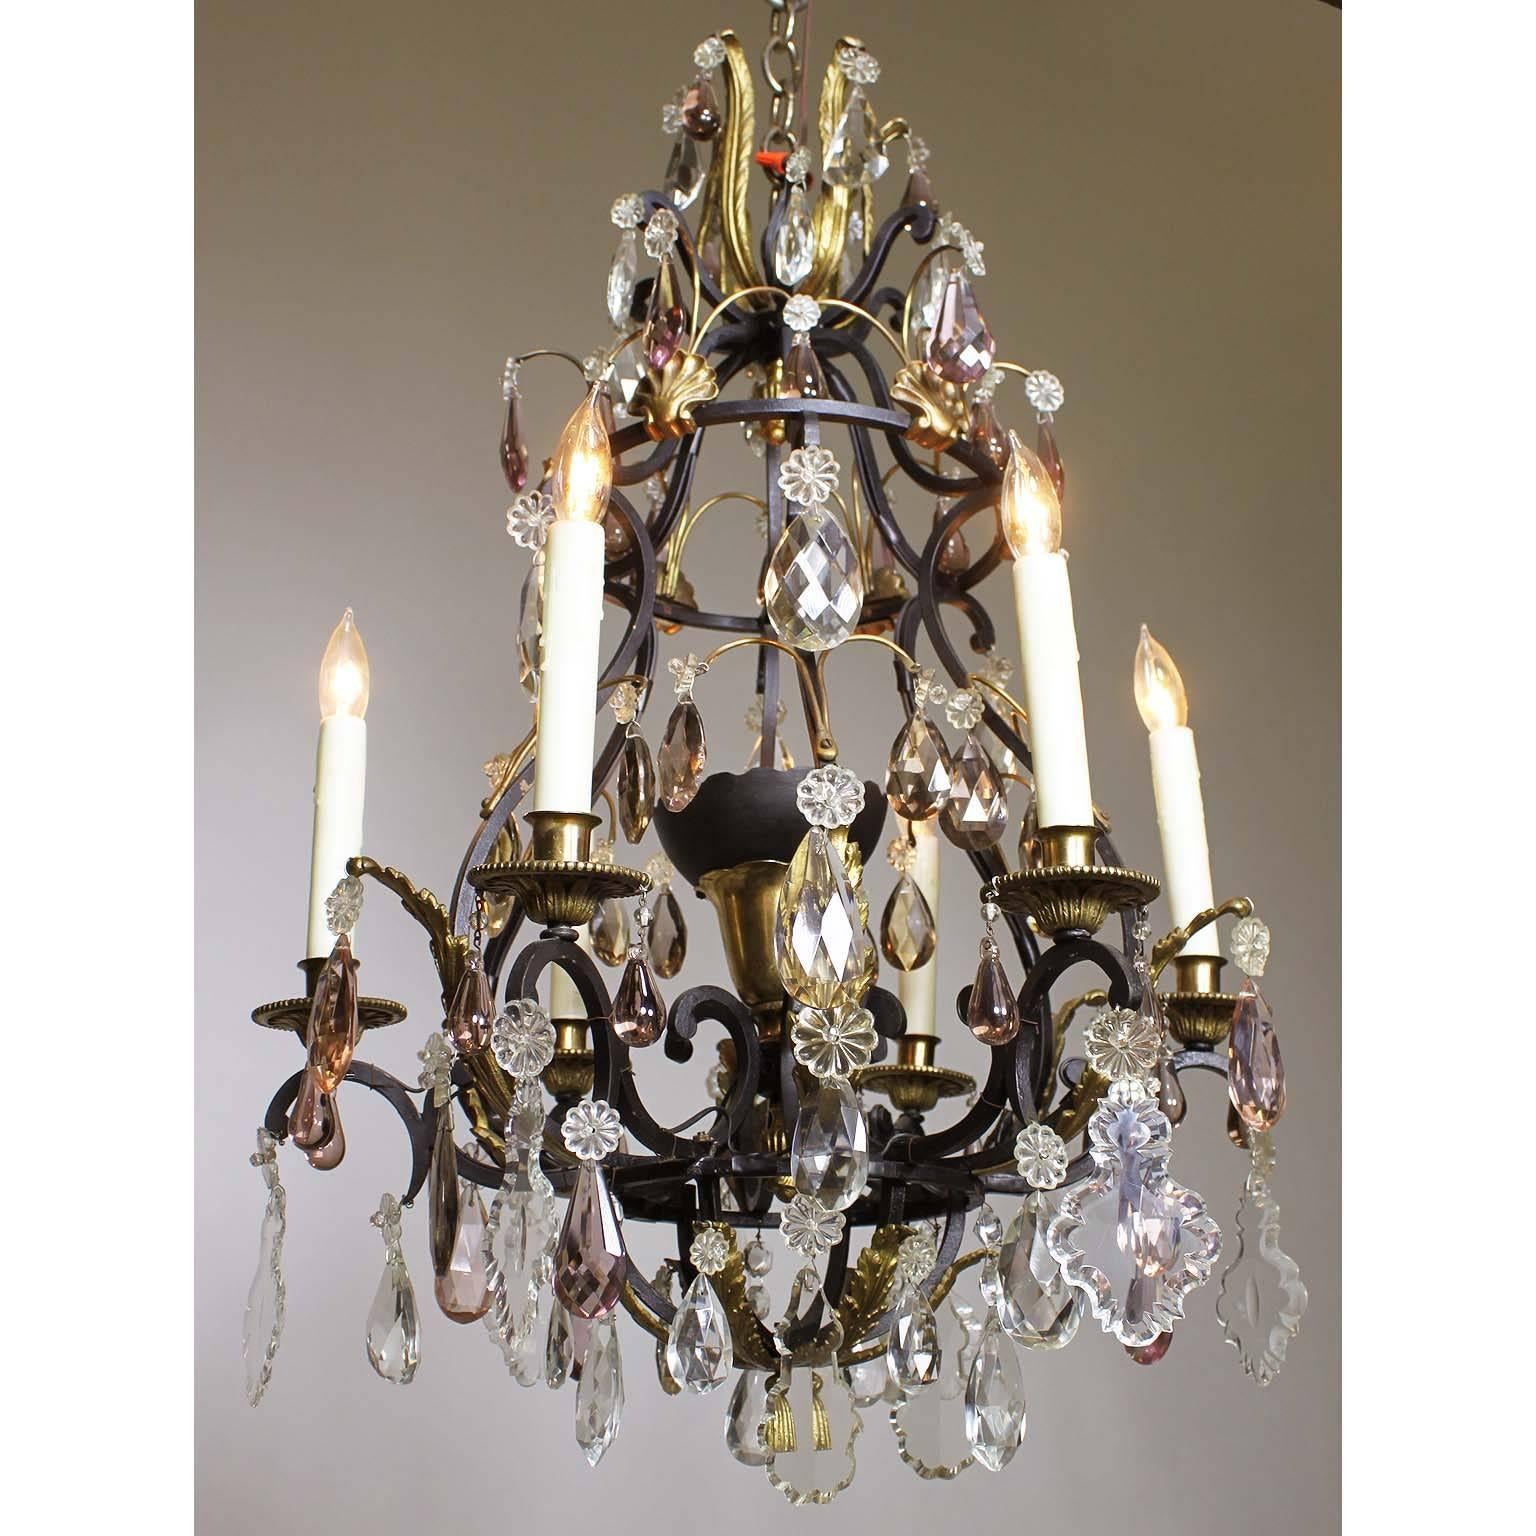 A French 19th-20th century Louis XV style wrought iron and bronze seven-light color crystal (cut-glass) chandelier. The black painted iron frame with six candle arms and a center light inside a cups, some of the pendants and drops are in amethyst